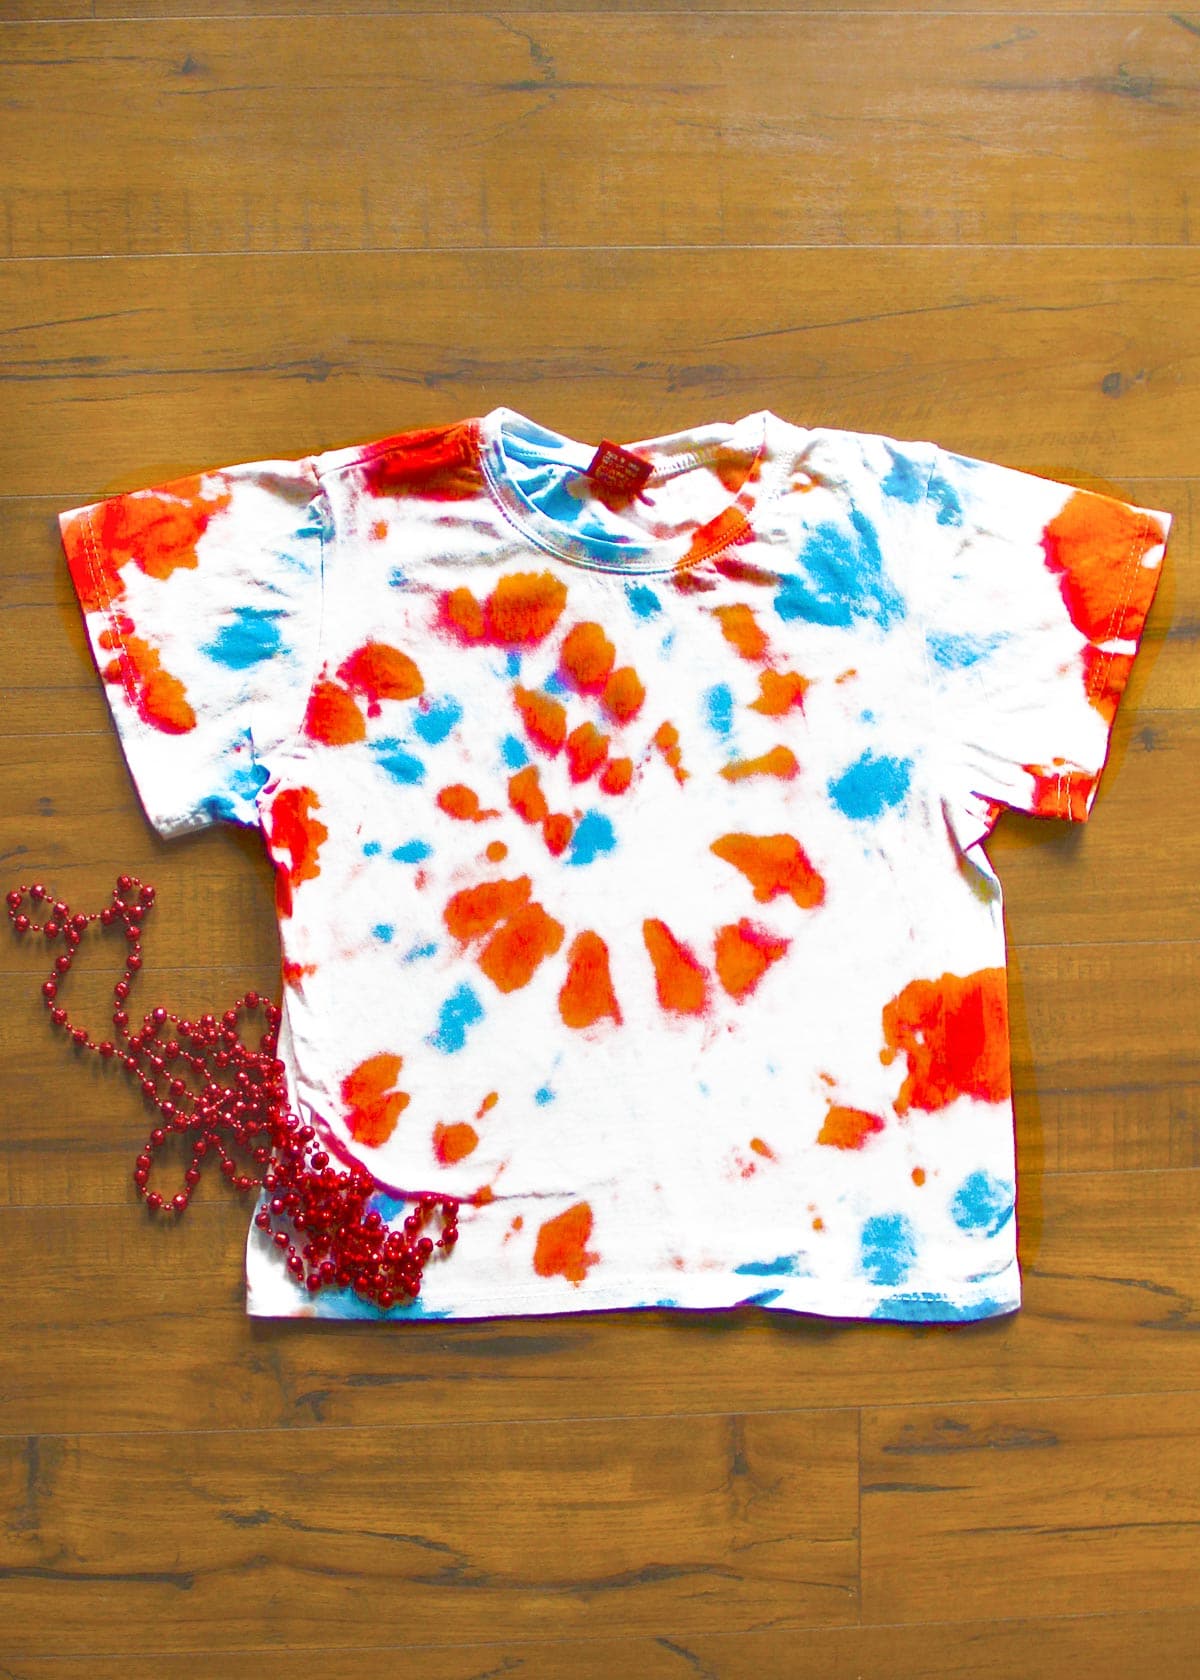 How to wash a tie dye shirt?